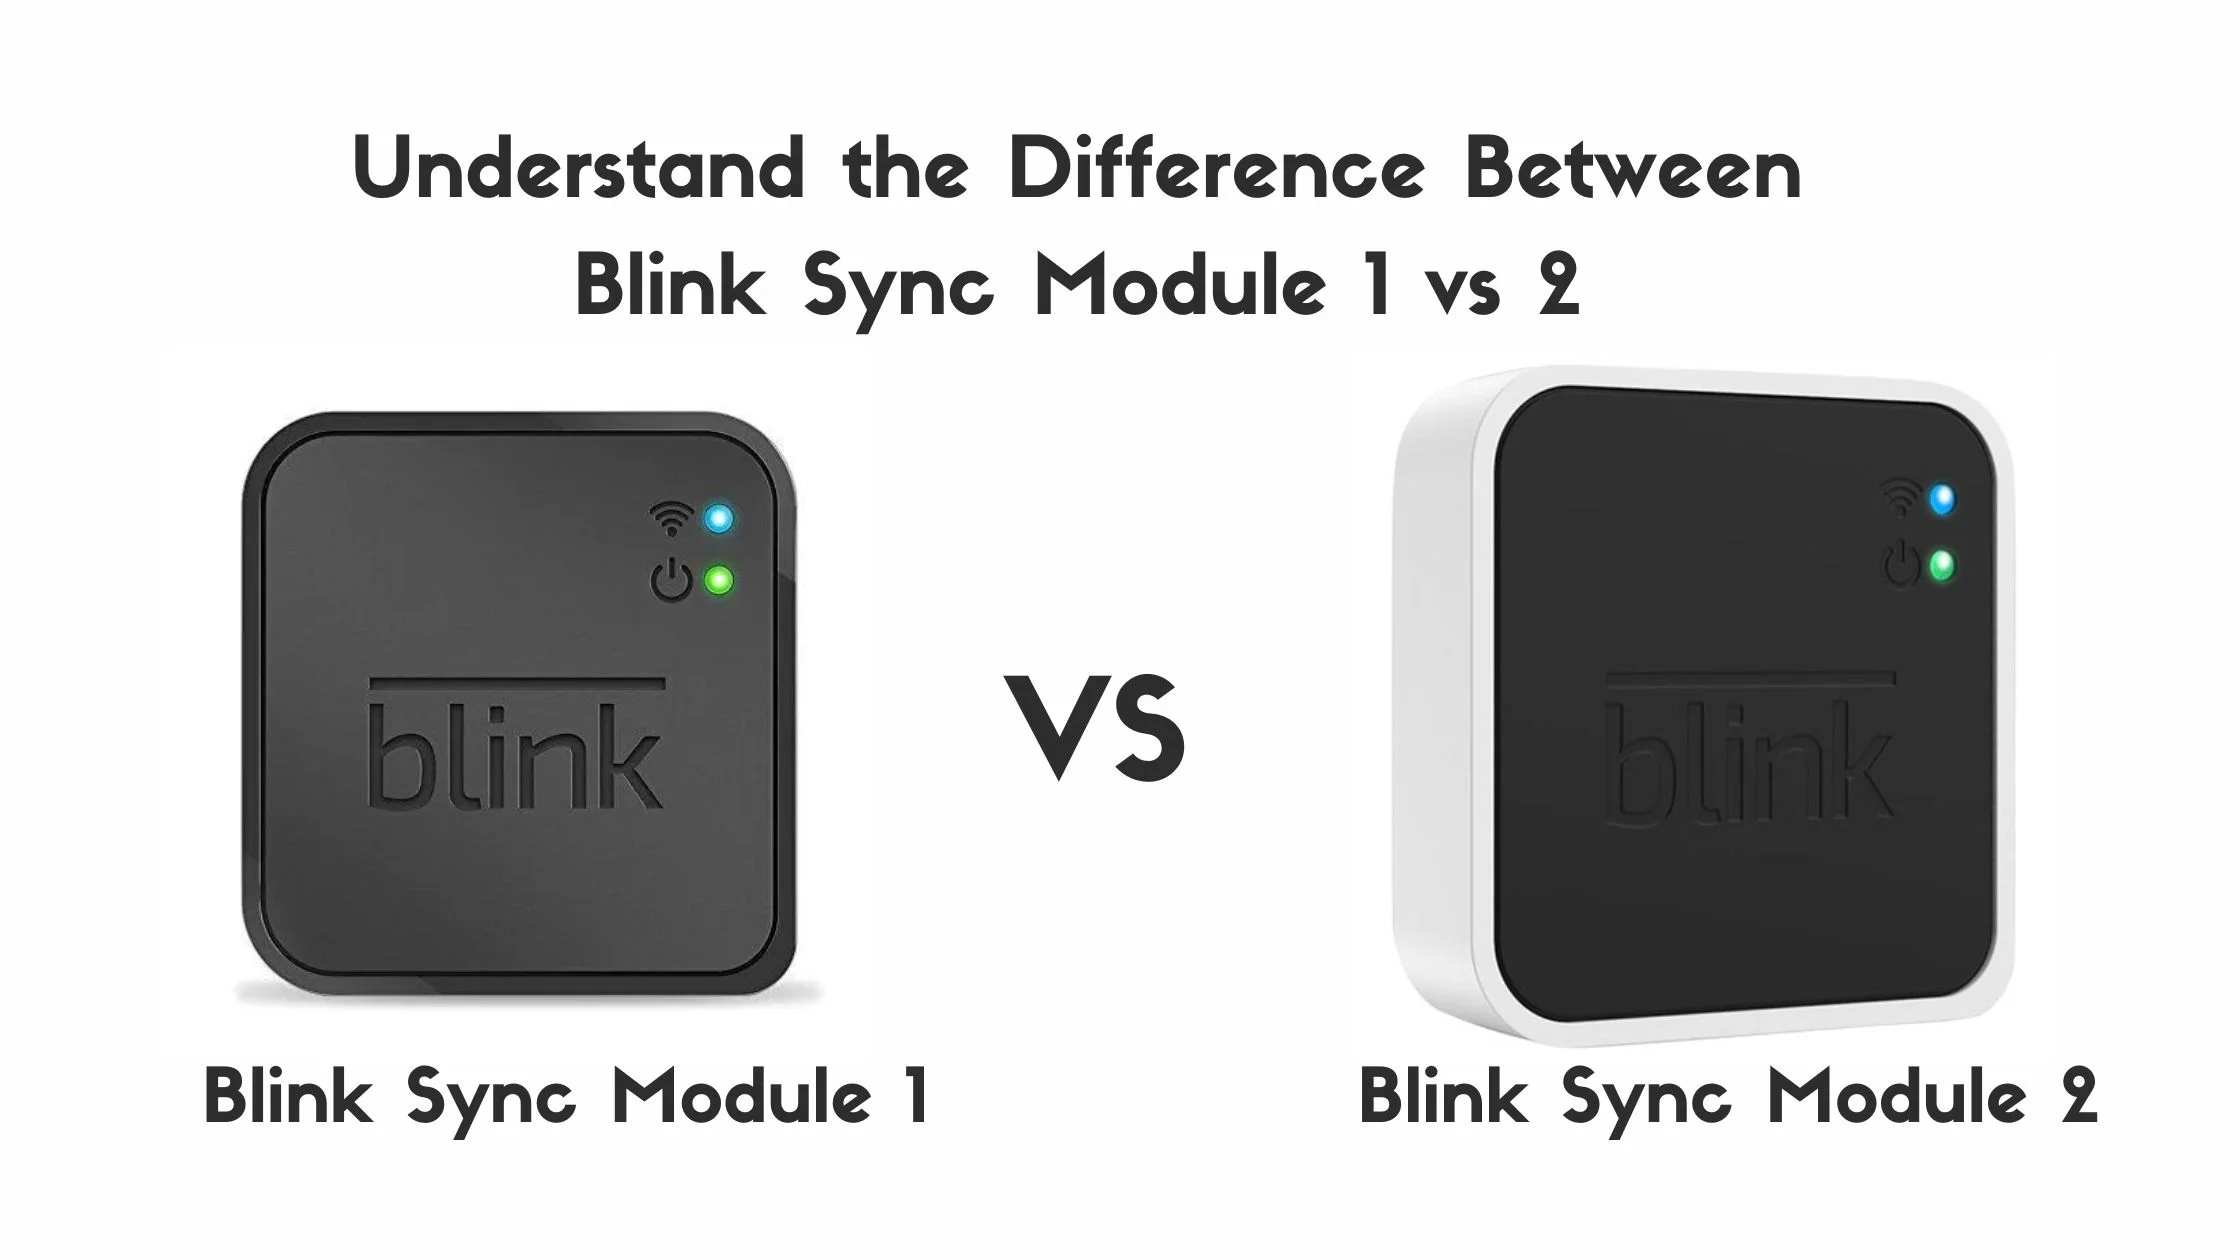 Understand the Difference Between Blink Sync Module 1 vs 2